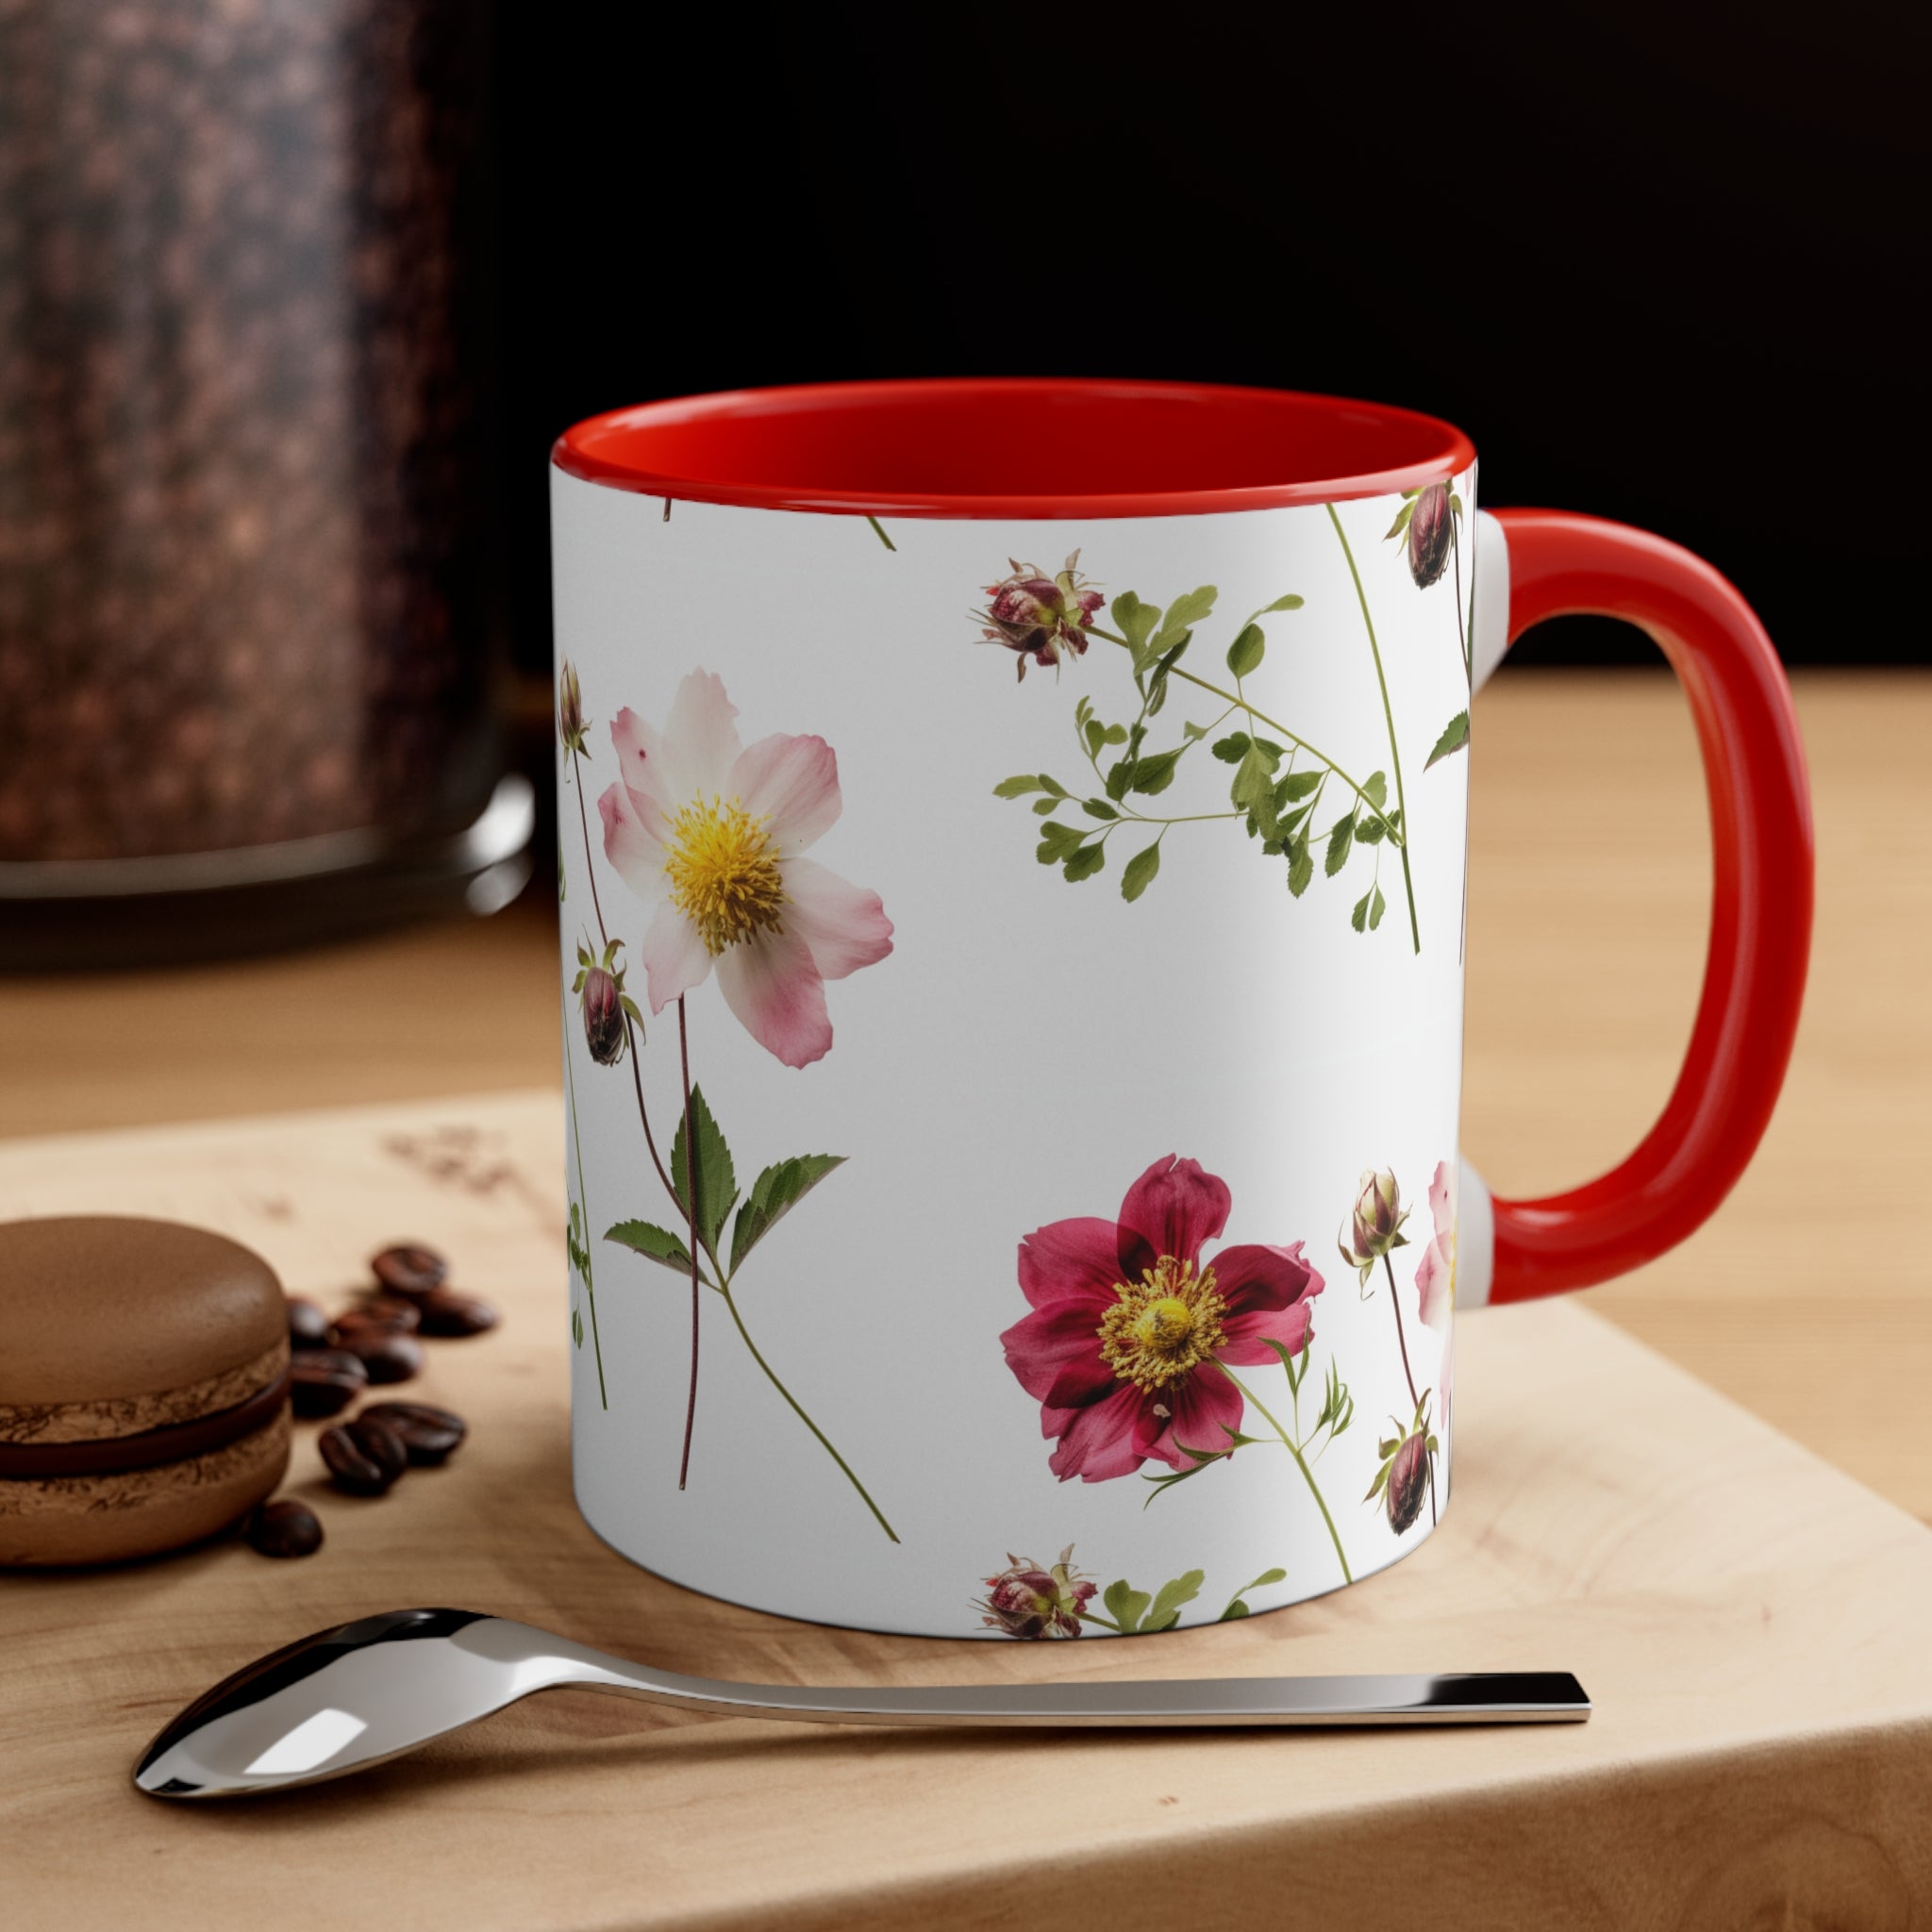 11oz accent coffee mug, Summer Flowers design, ceramic tea cup, handcrafted, vibrant floral gift, unique home decor for "Cawfee" Lovers